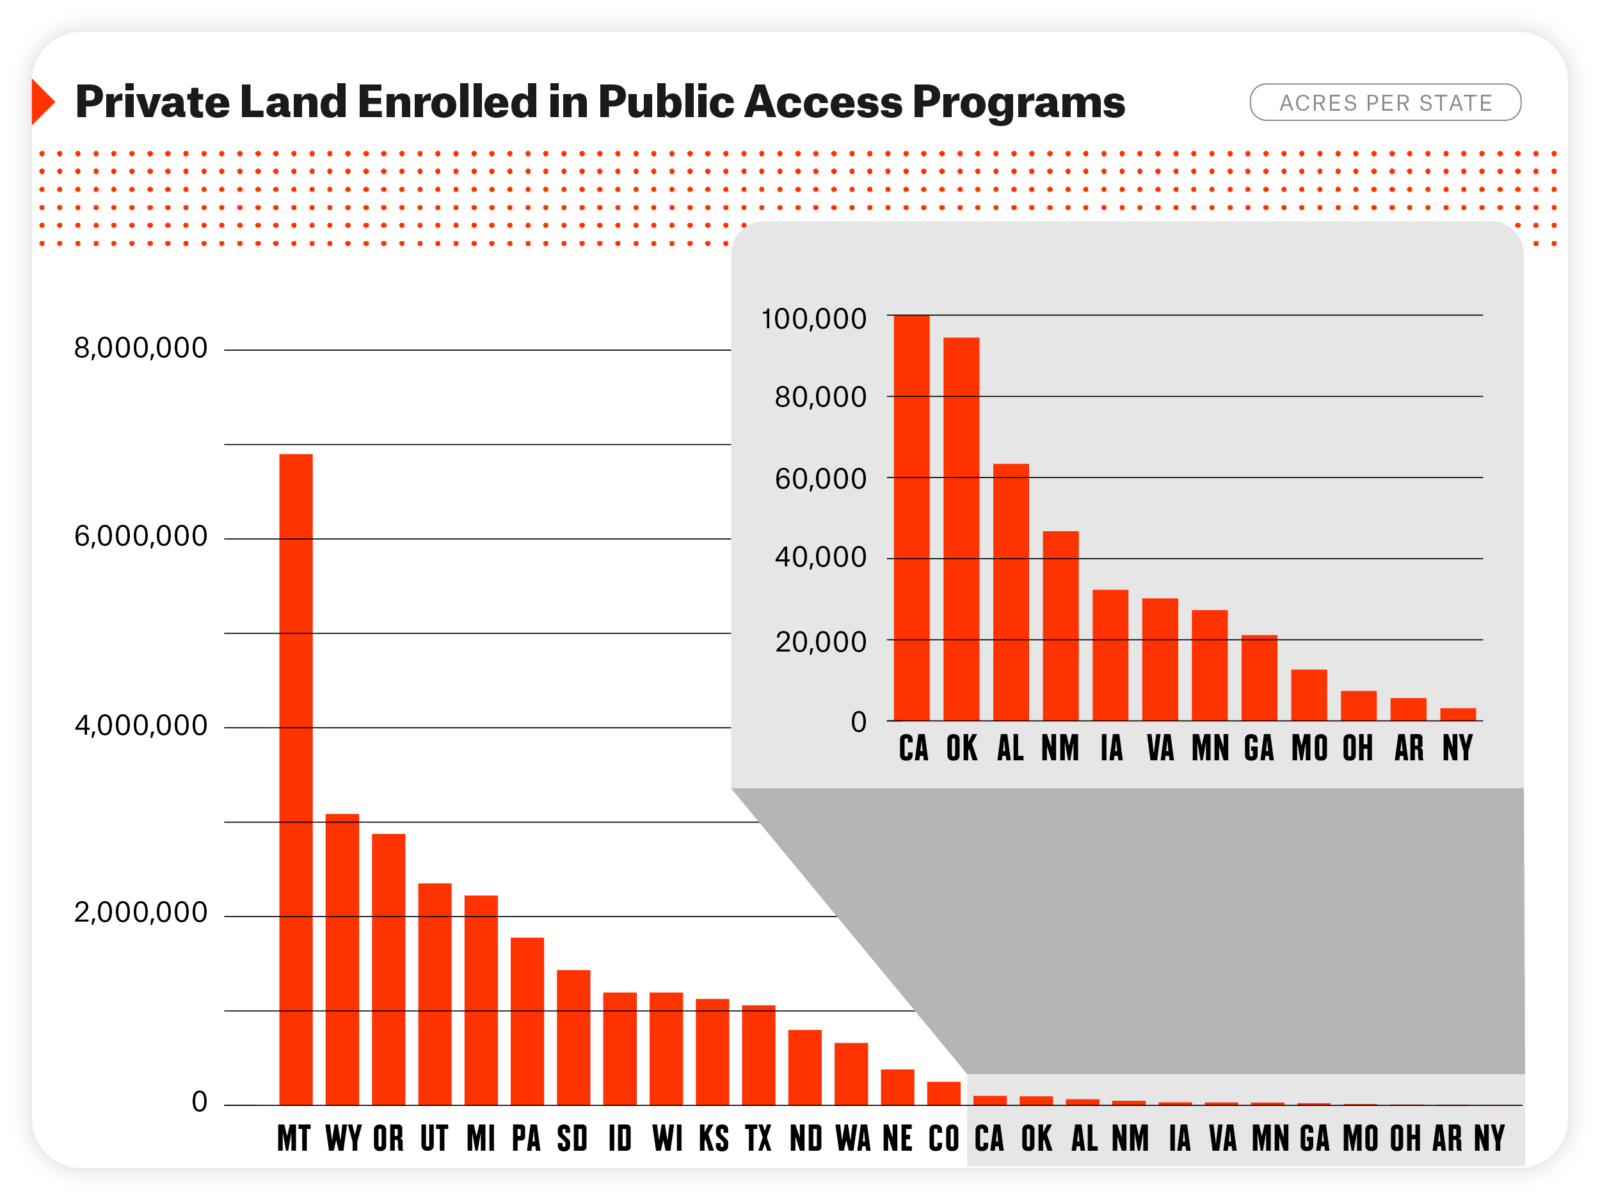 Bar graphs showing the states with acres per state that have private land enrolled in public access programs 